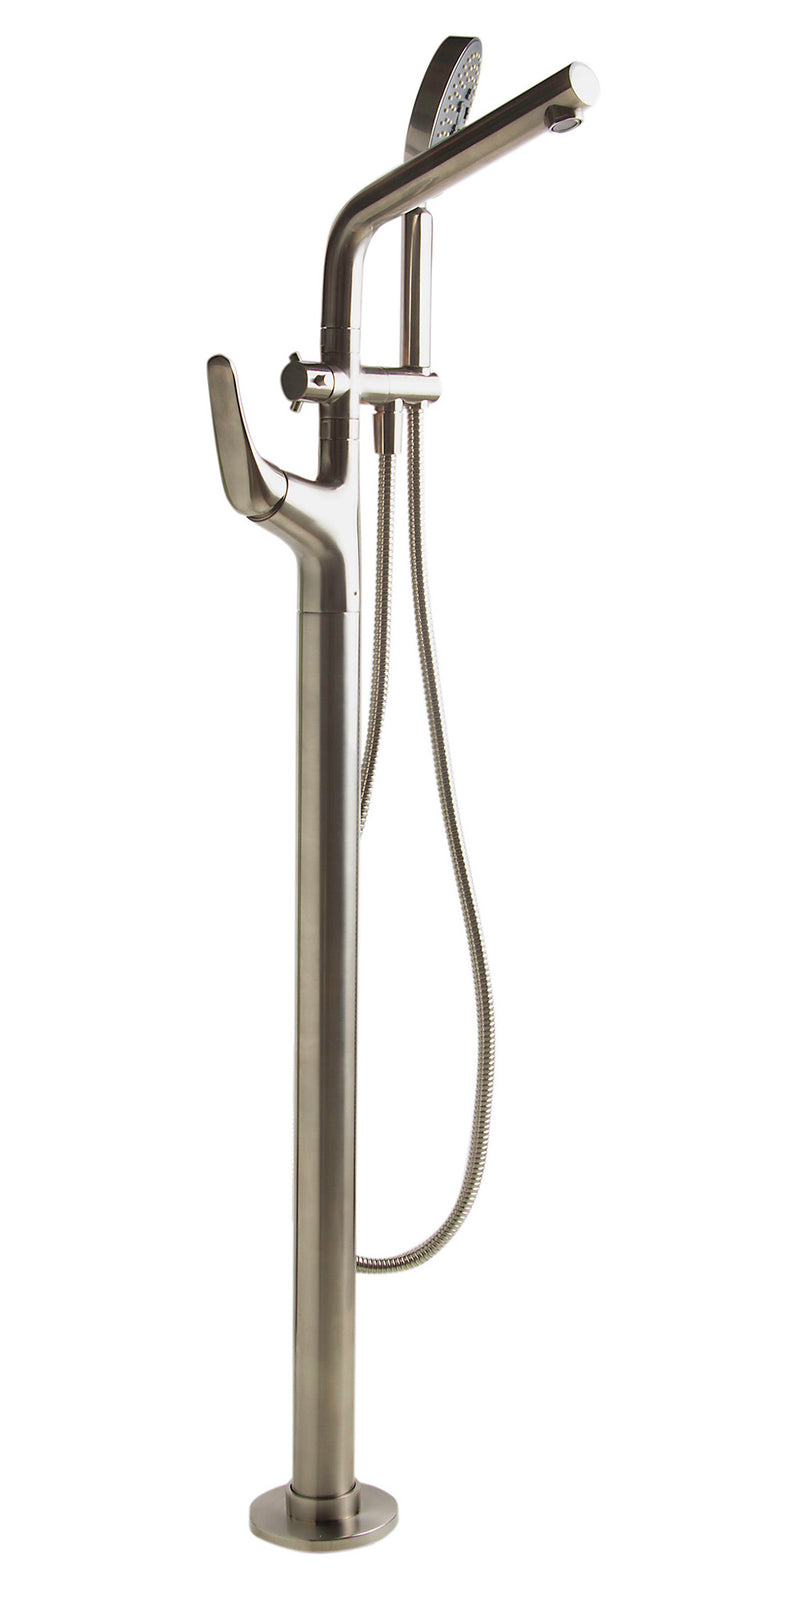 ALFI Brushed Nickel Floor Mounted Tub Filler and Mixer with additional Hand Held Shower Head AB2758